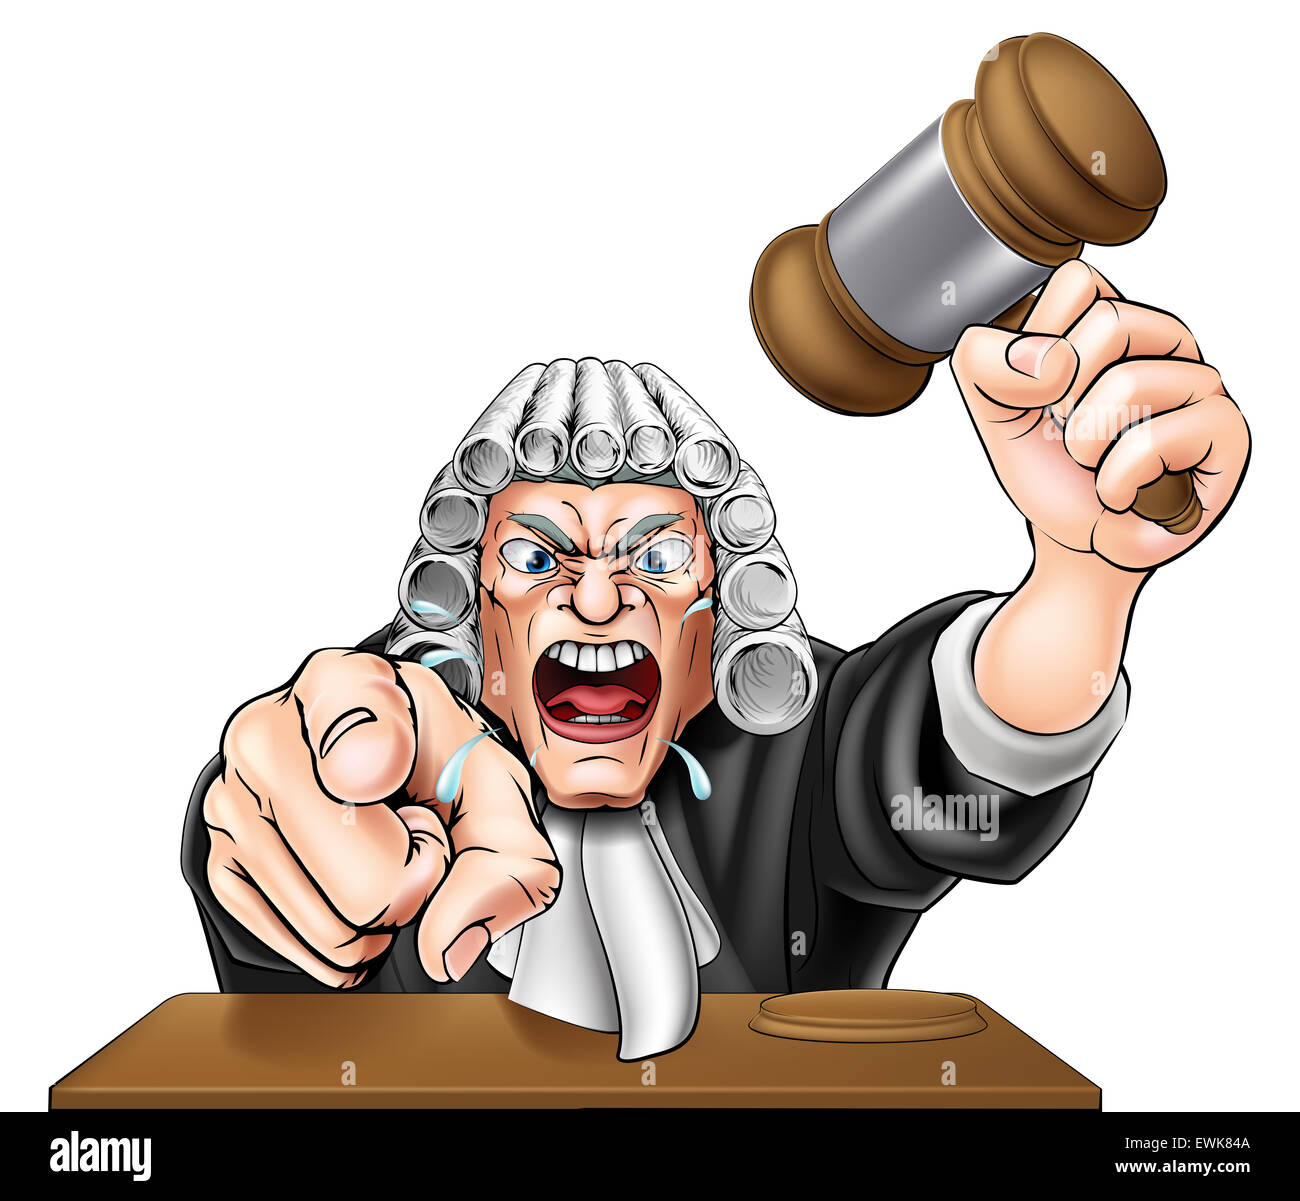 An illustration of an angry judge cartoon character shouting and pointing at the viewer Stock Photo